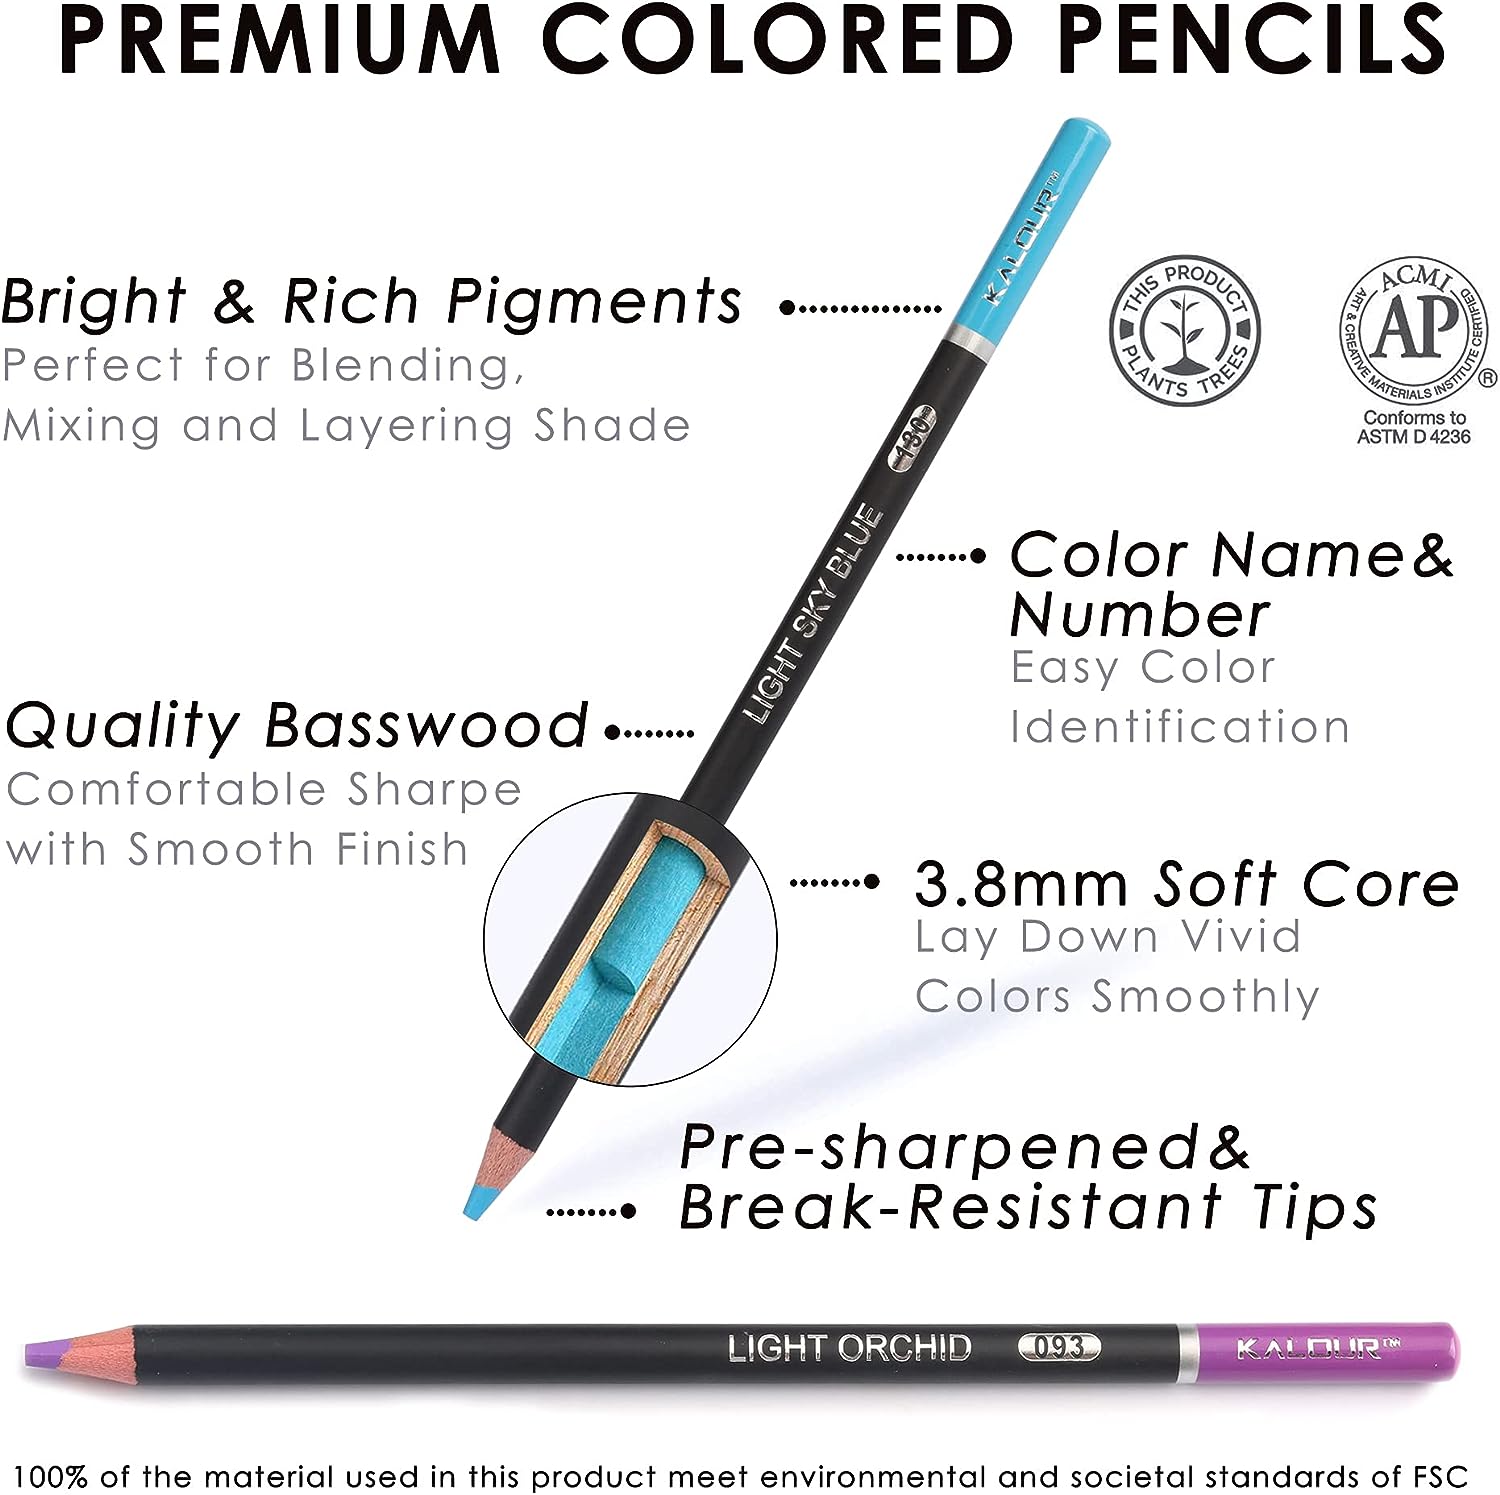 KALOUR 50 Metallic Colored Pencils for Adult Coloring Drawing